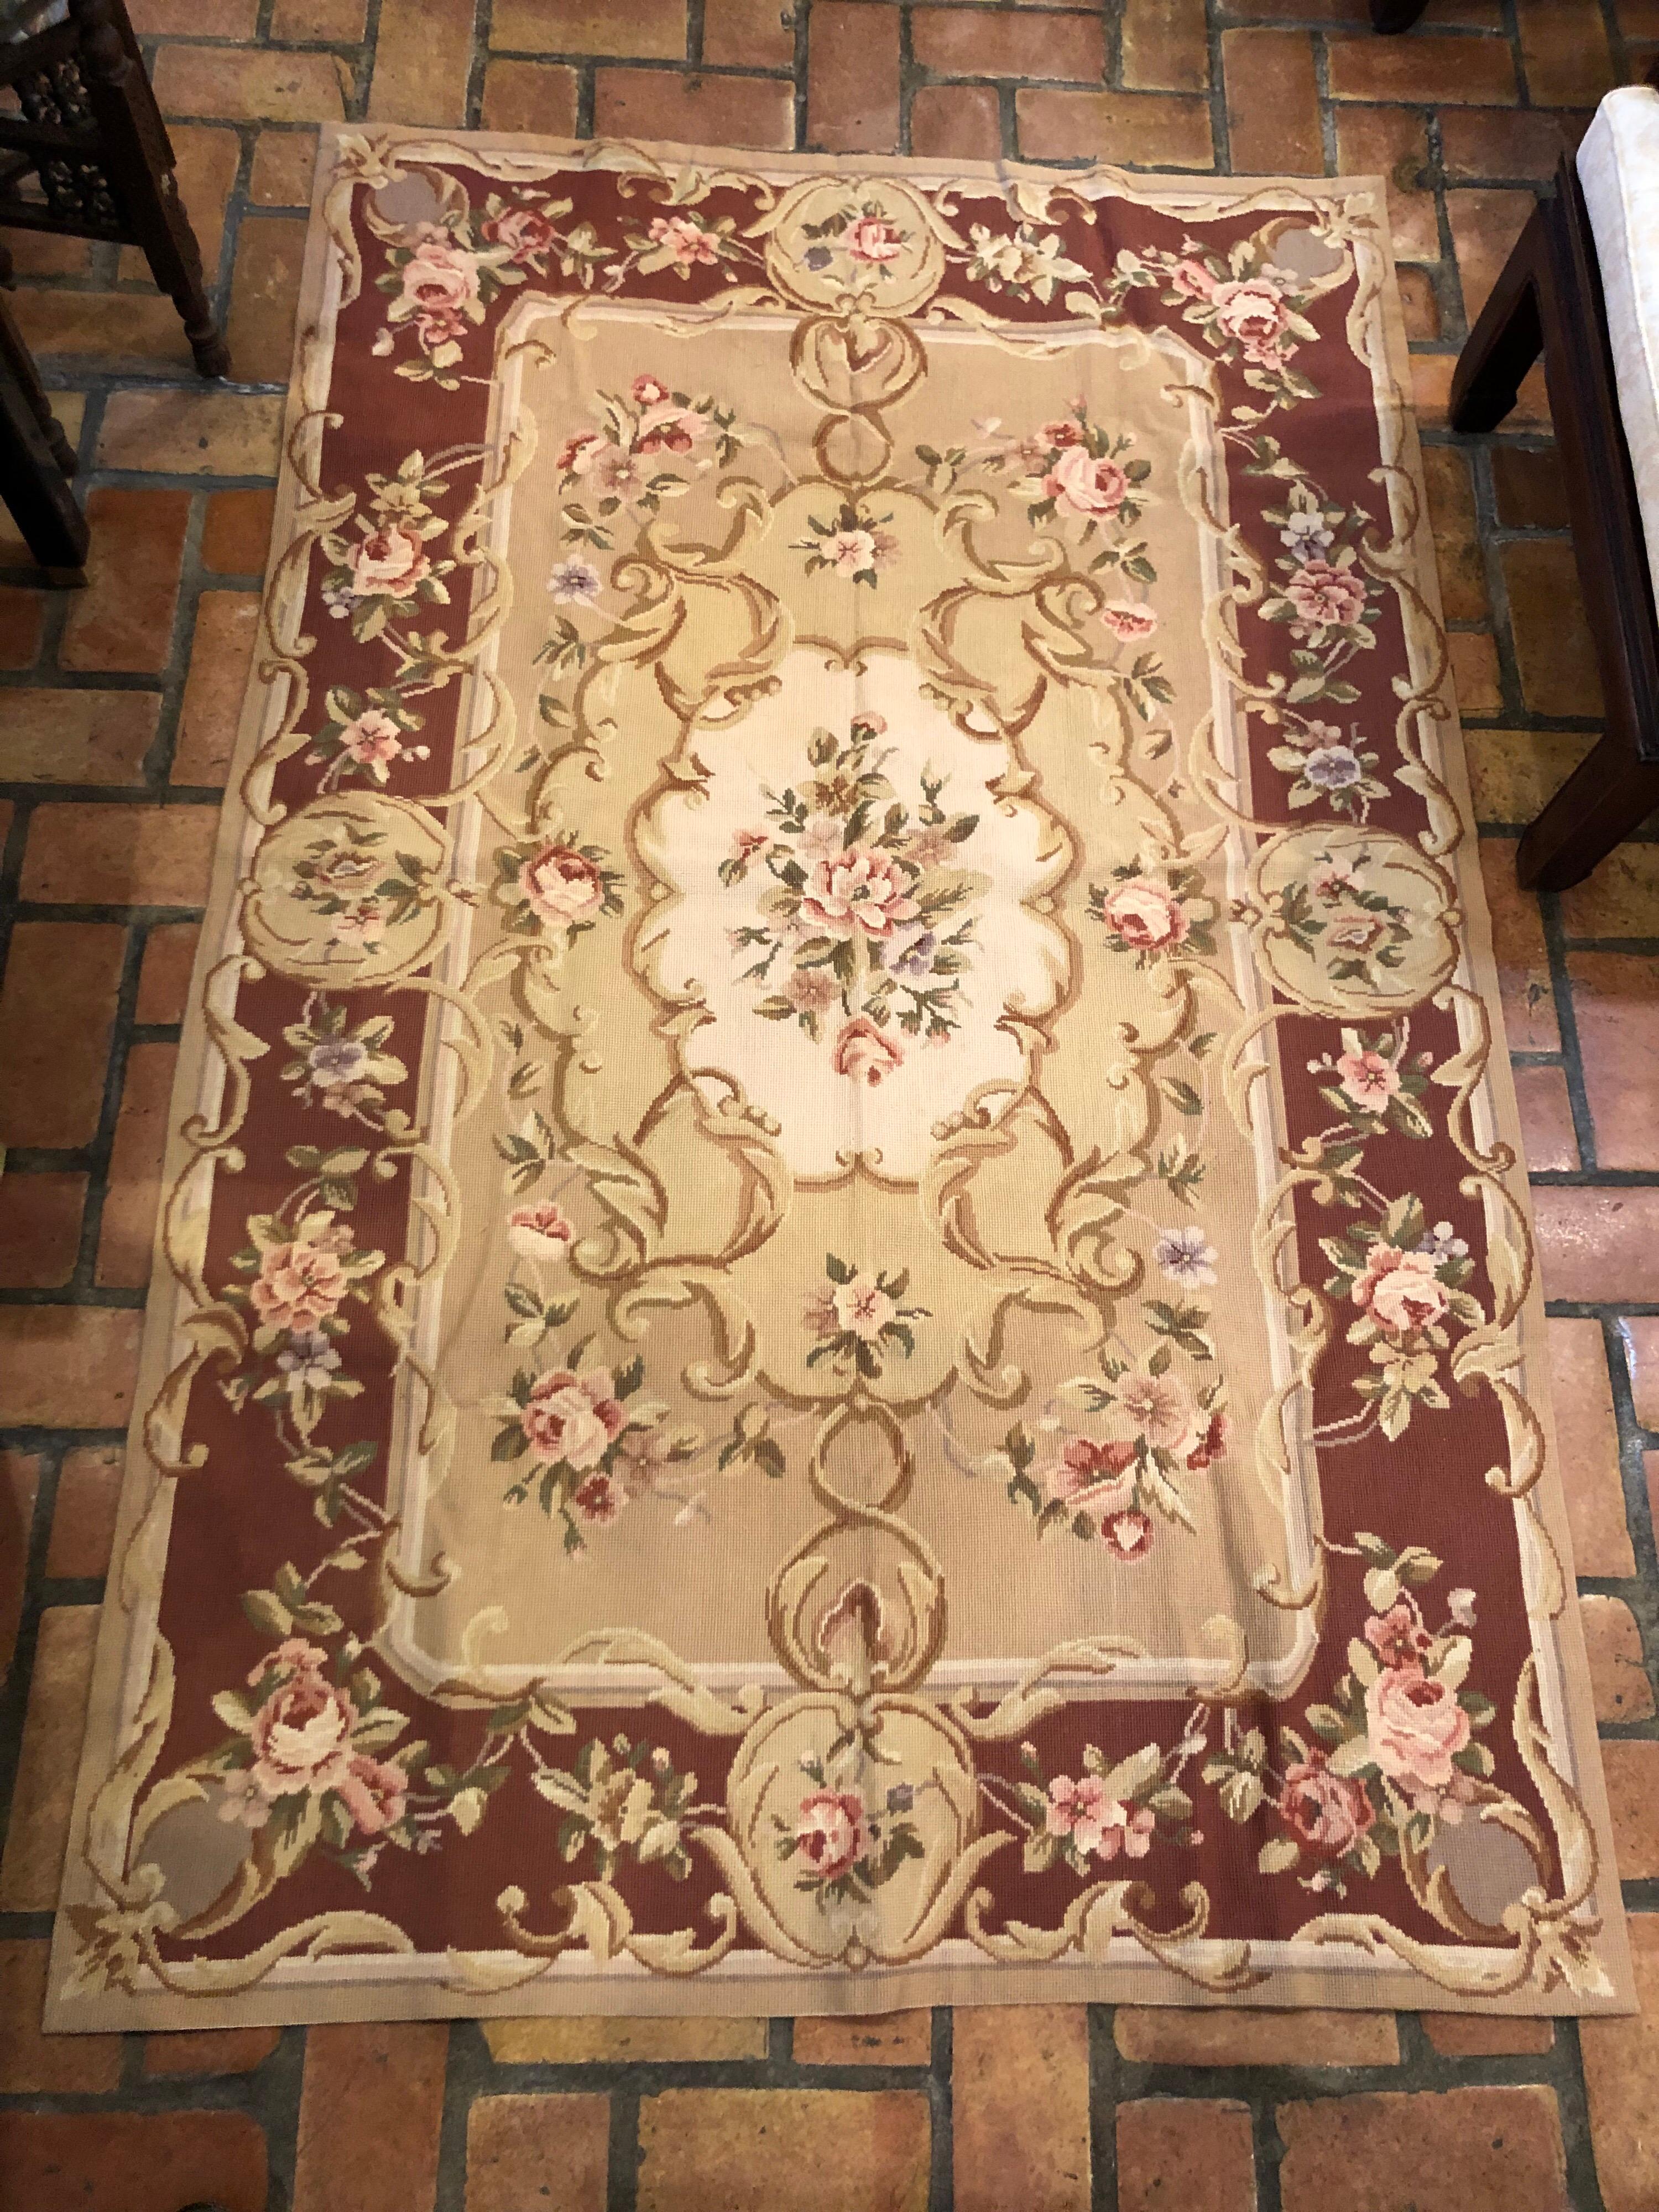 Aubusson needlepoint rug 4' x 6 'new and unused. Rose adorned area rug. Soft shades of brown, tan, pink, sage green and cream/ivory. Perfect for a bedroom or a hallway. This can ship parcel 1stdibs for $45. Please request parcel shipping. Excellent